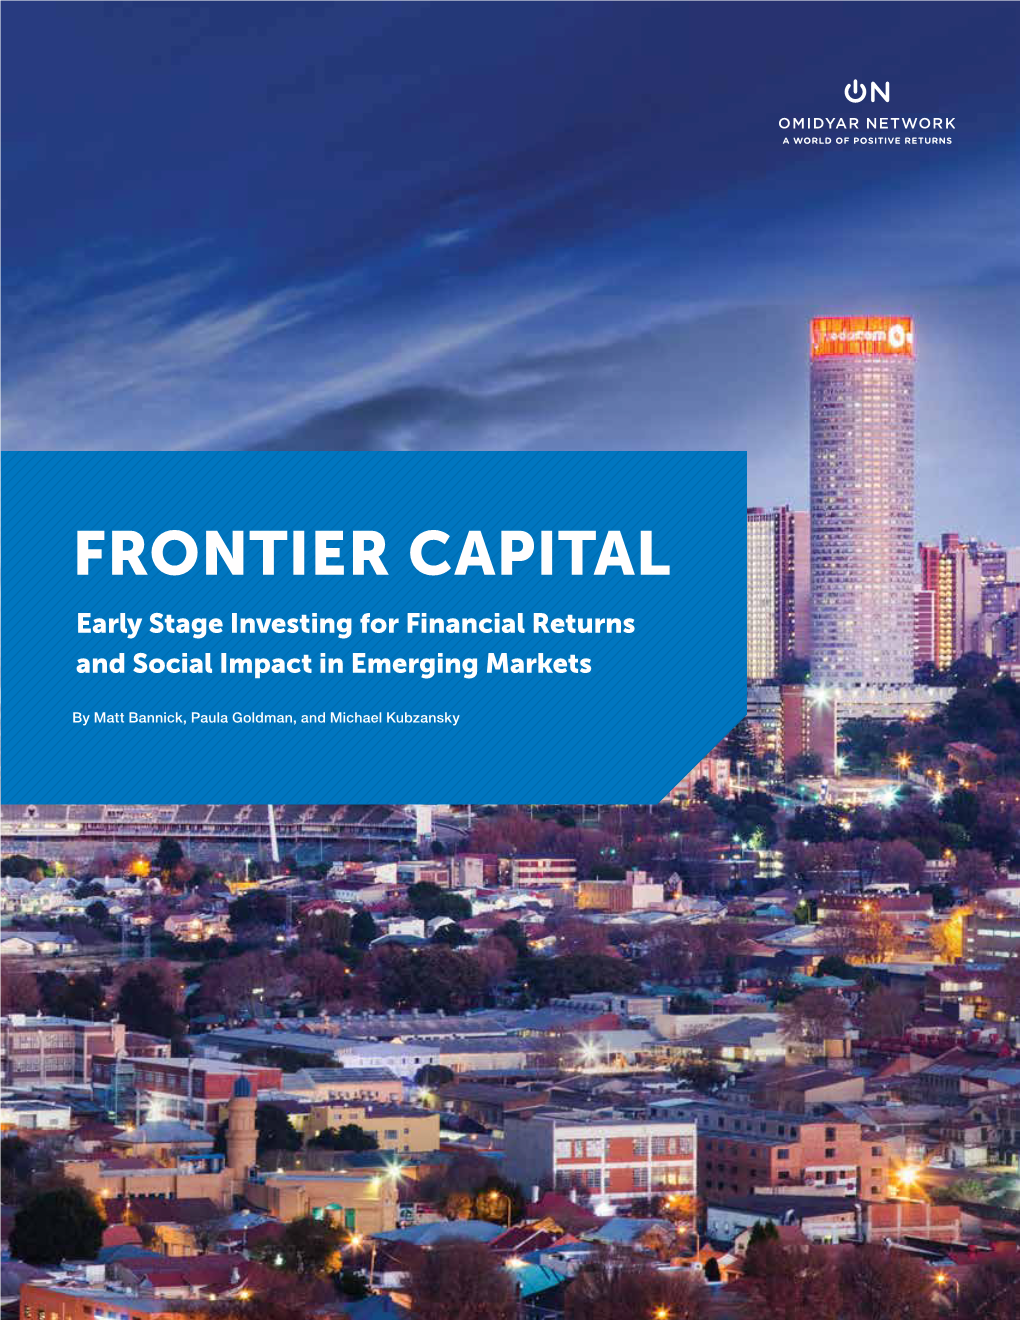 FRONTIER CAPITAL Early Stage Investing for Financial Returns and Social Impact in Emerging Markets